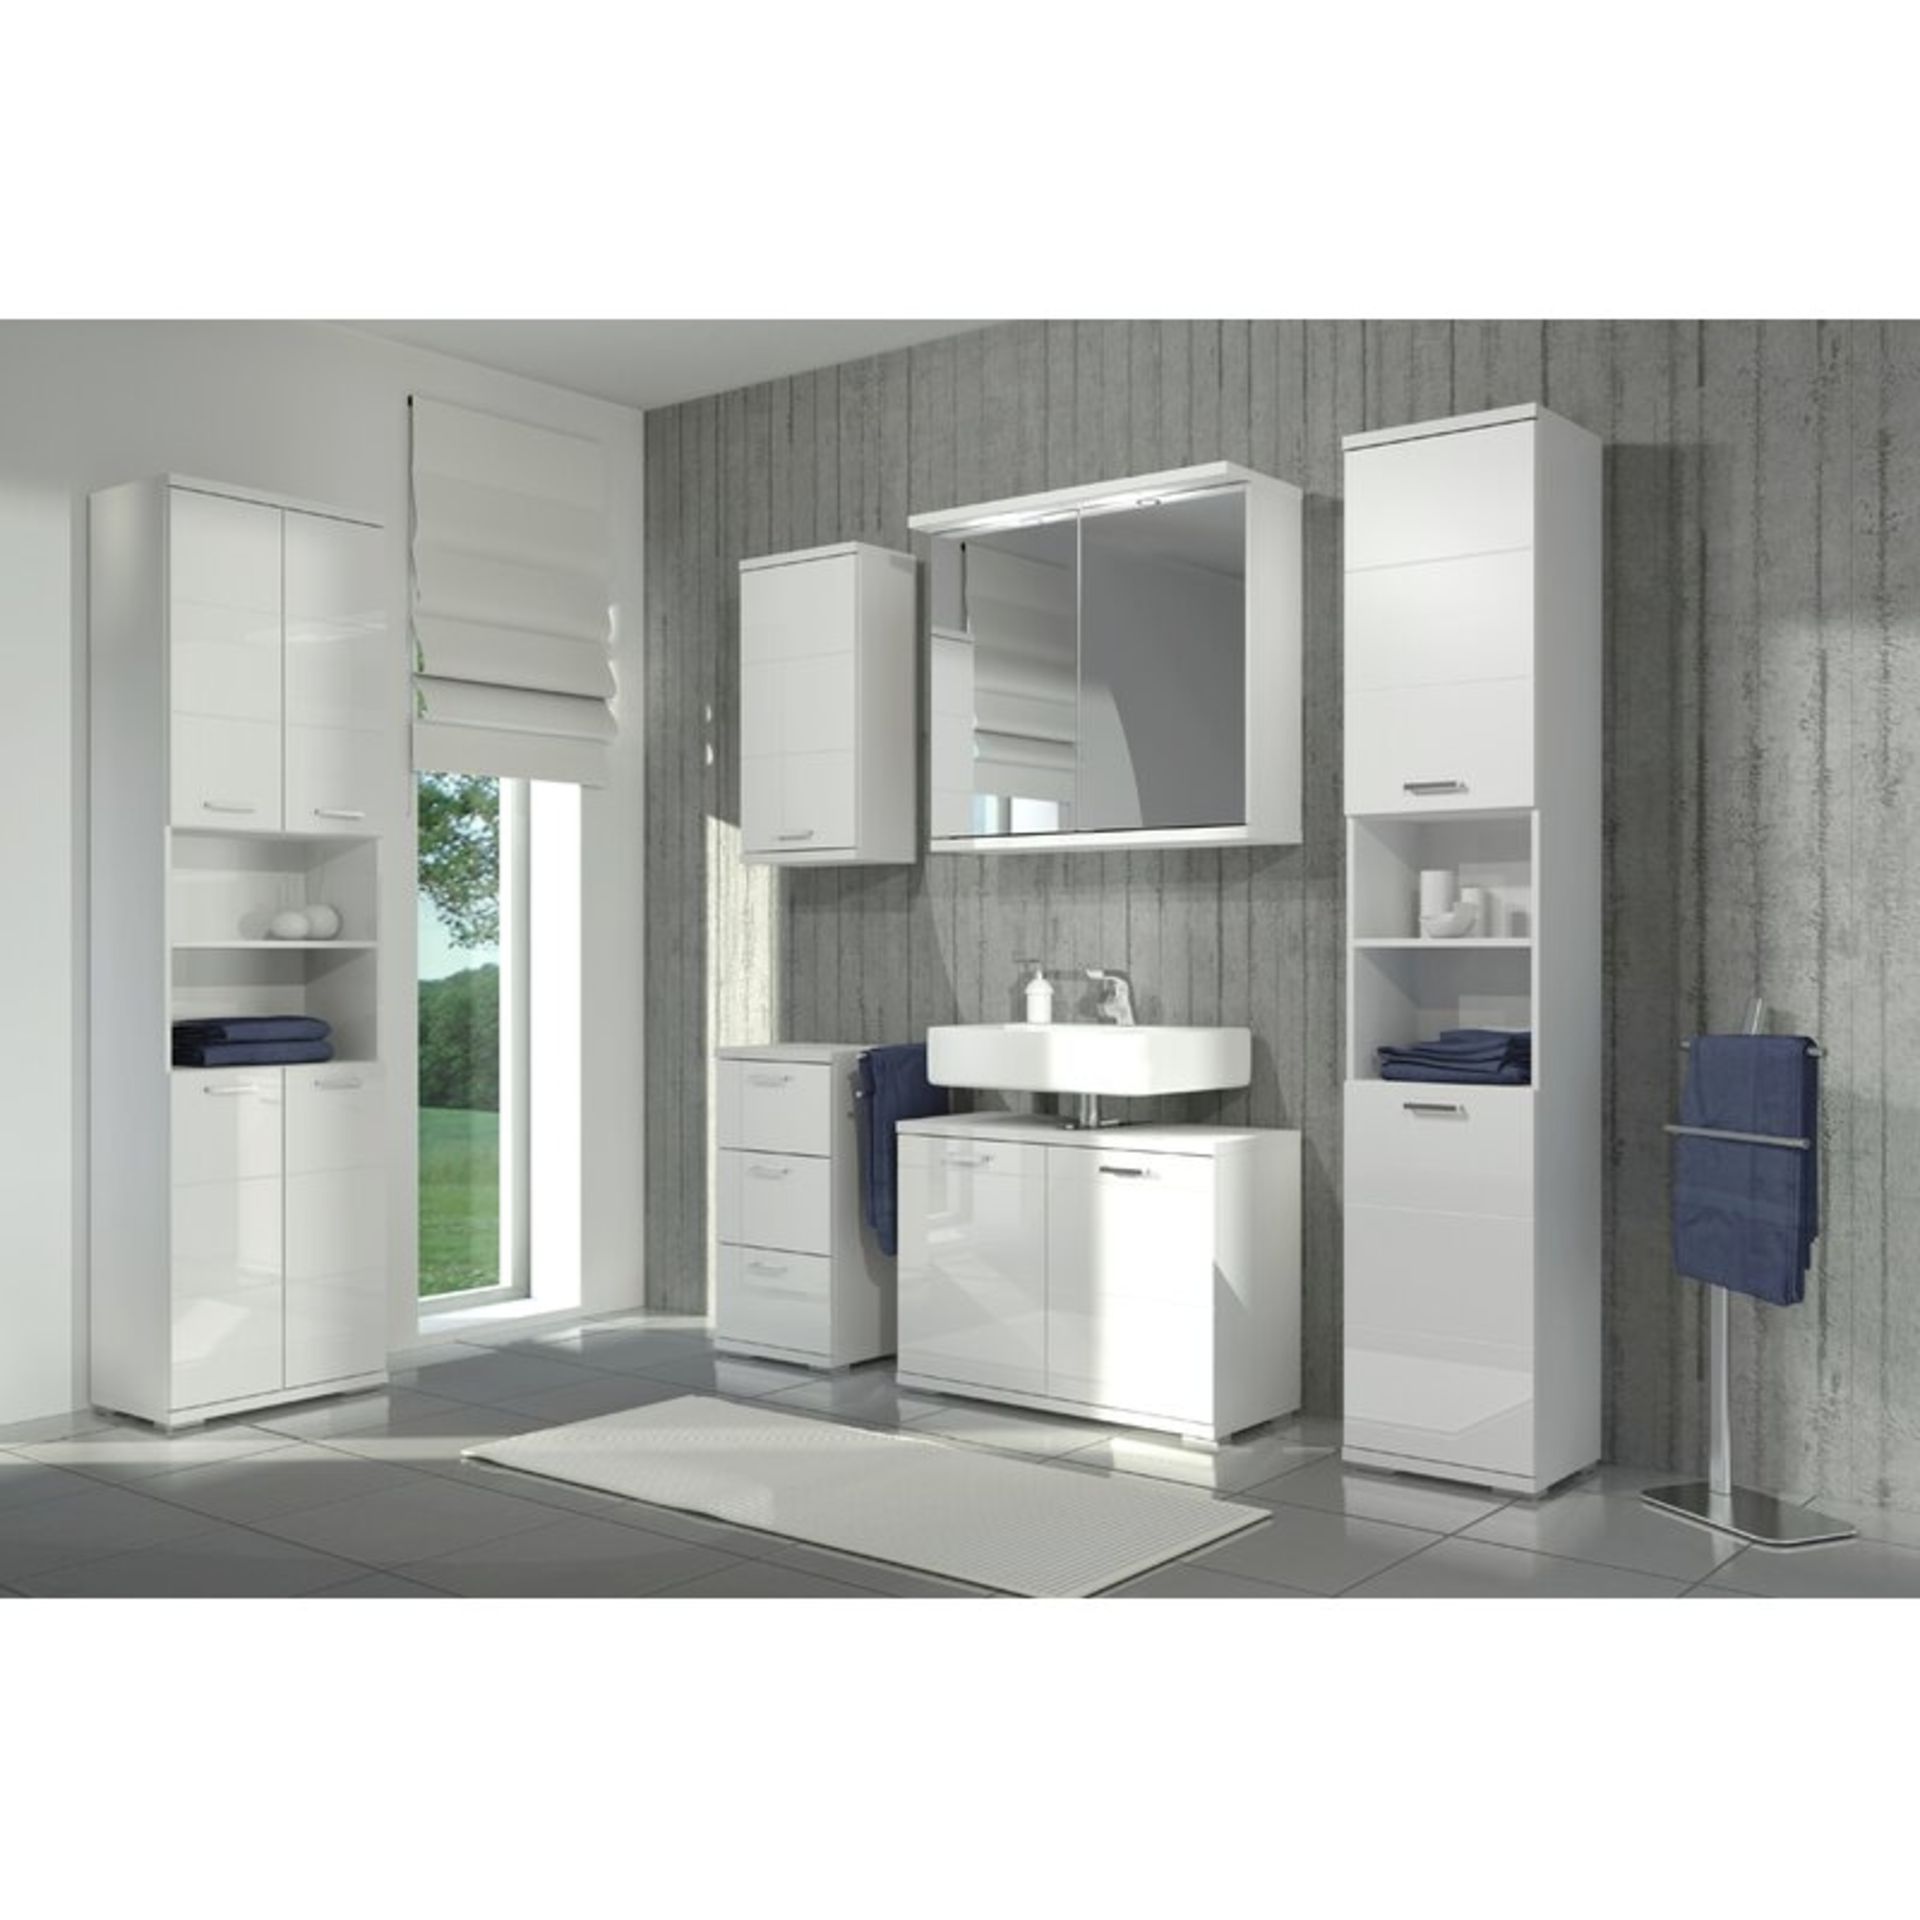 Pegues 36 x 74cm Free Standing Cabinet - RRP £112.99 - Image 2 of 3